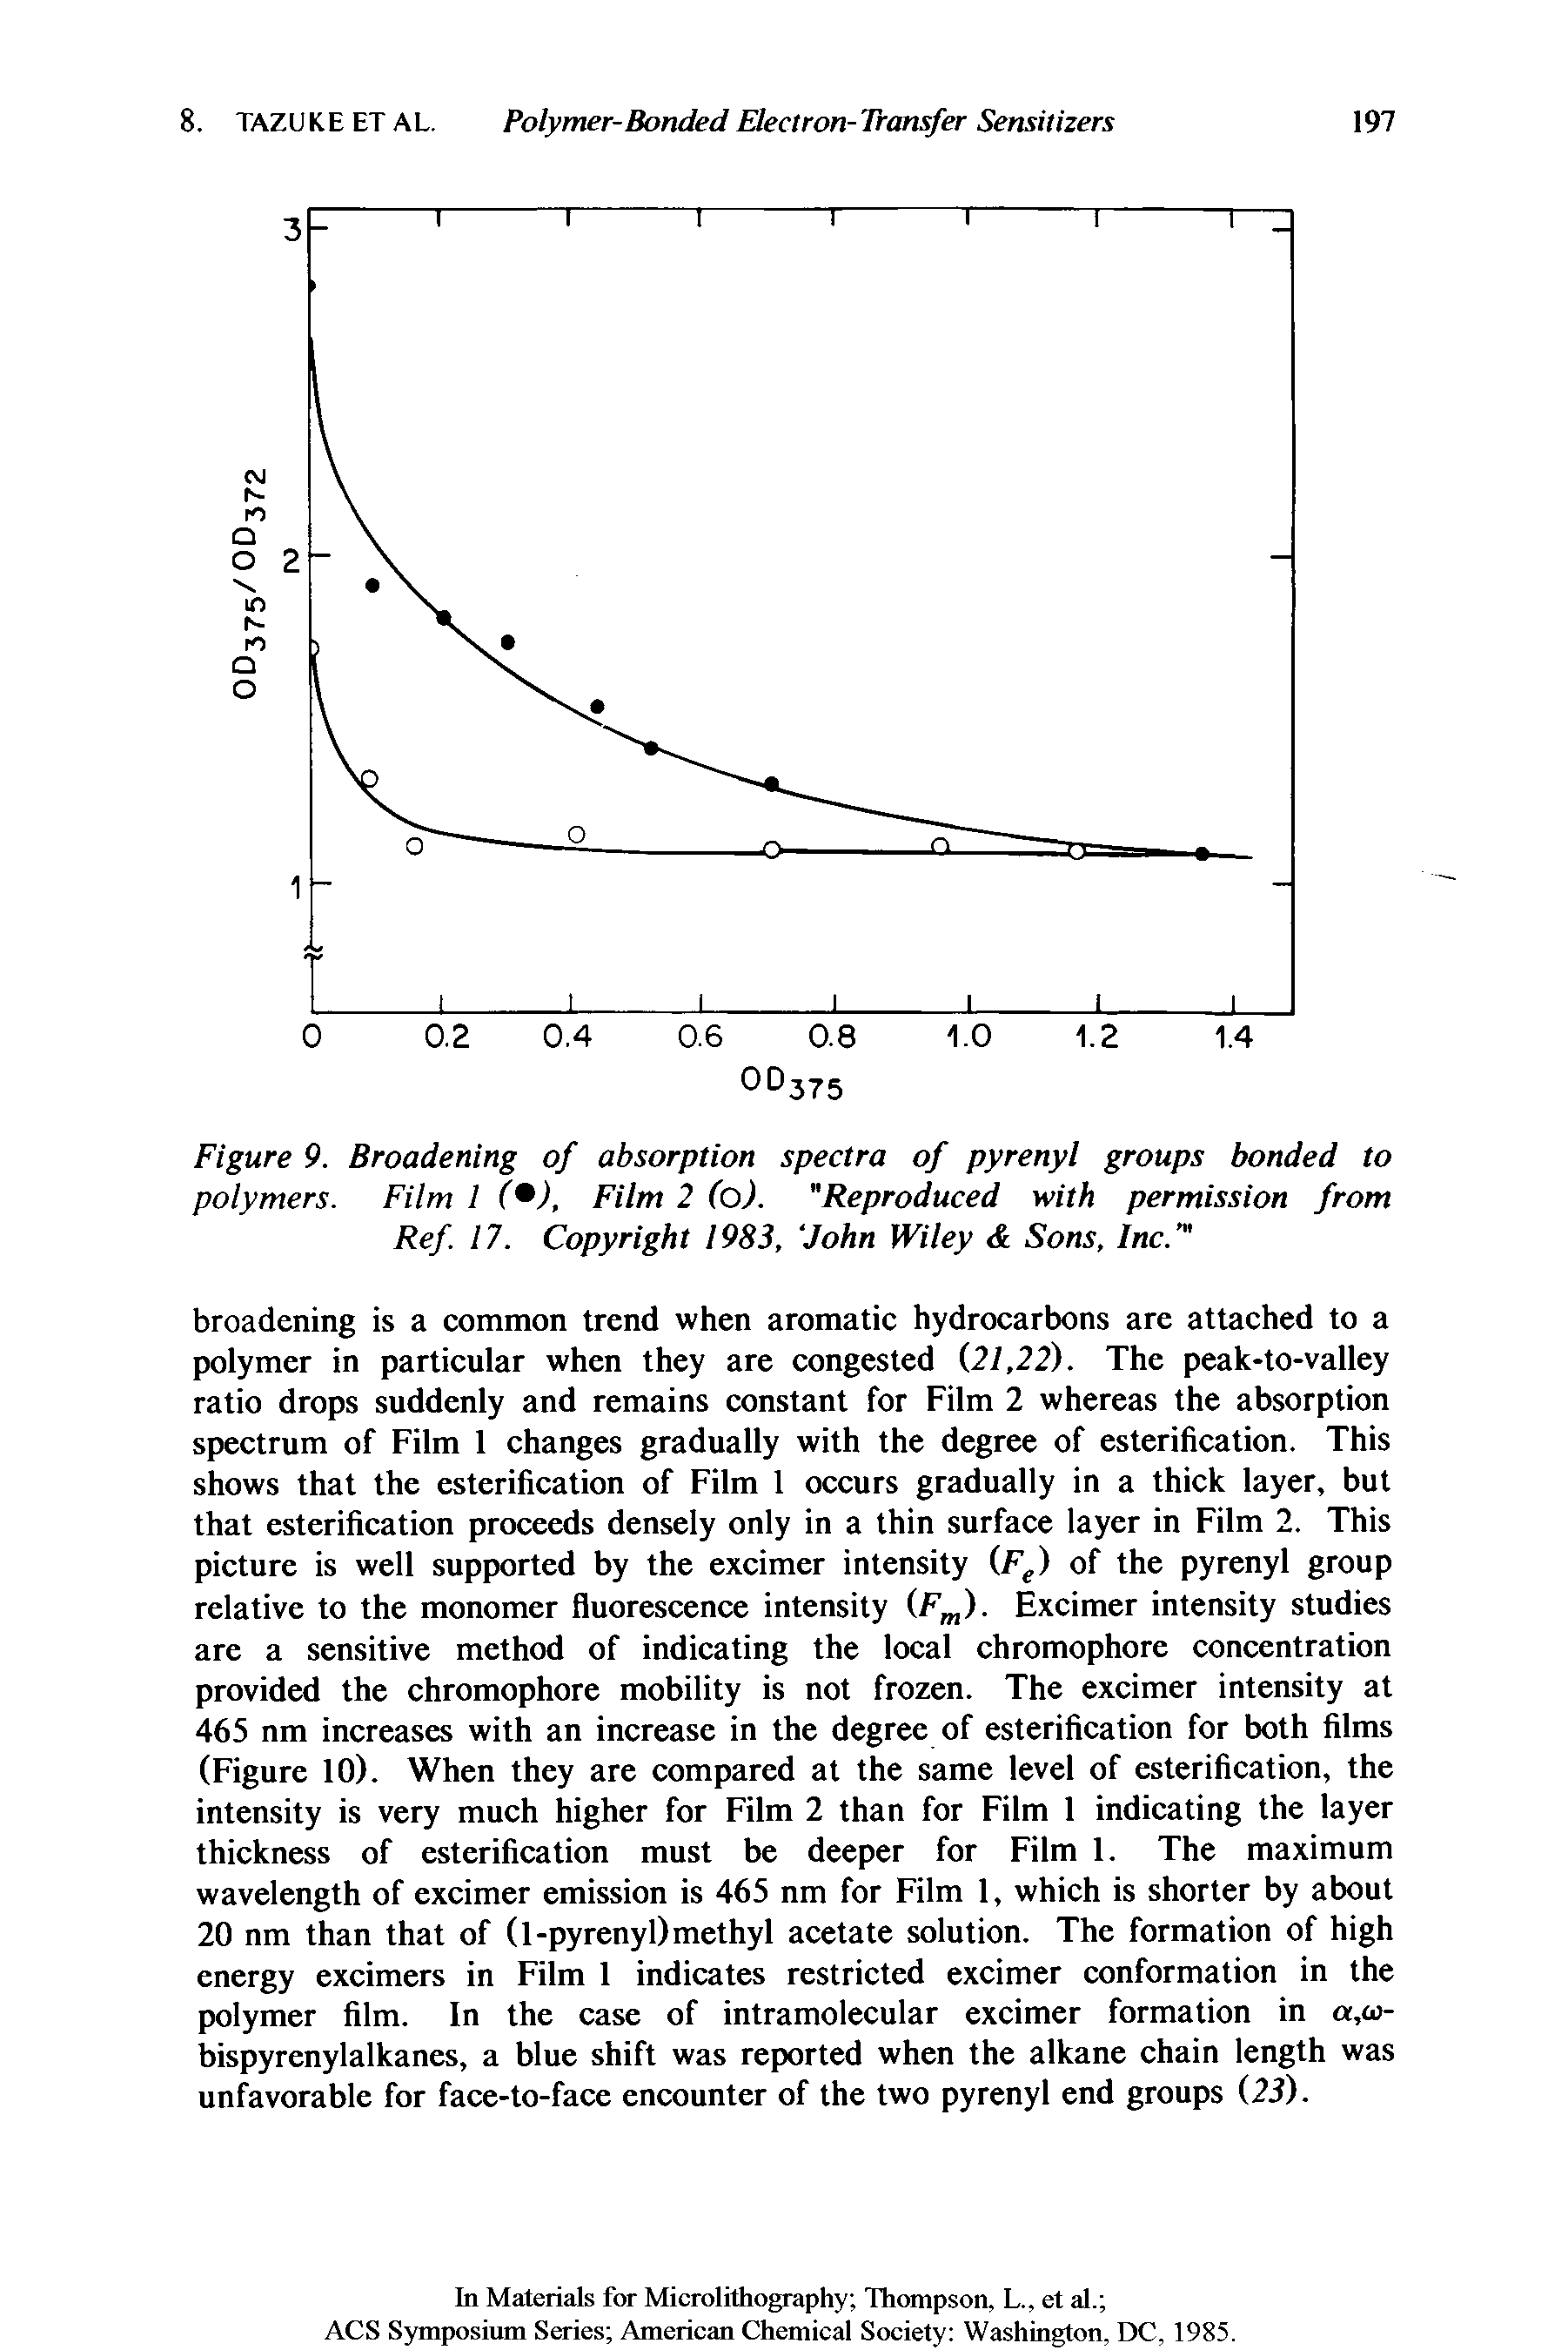 Figure 9. Broadening of absorption spectra of pyrenyl groups bonded to polymers. Film 1 ( ), Film 2 (o). "Reproduced with permission from Ref. 17. Copyright 1983, John Wiley Sons, Inc.